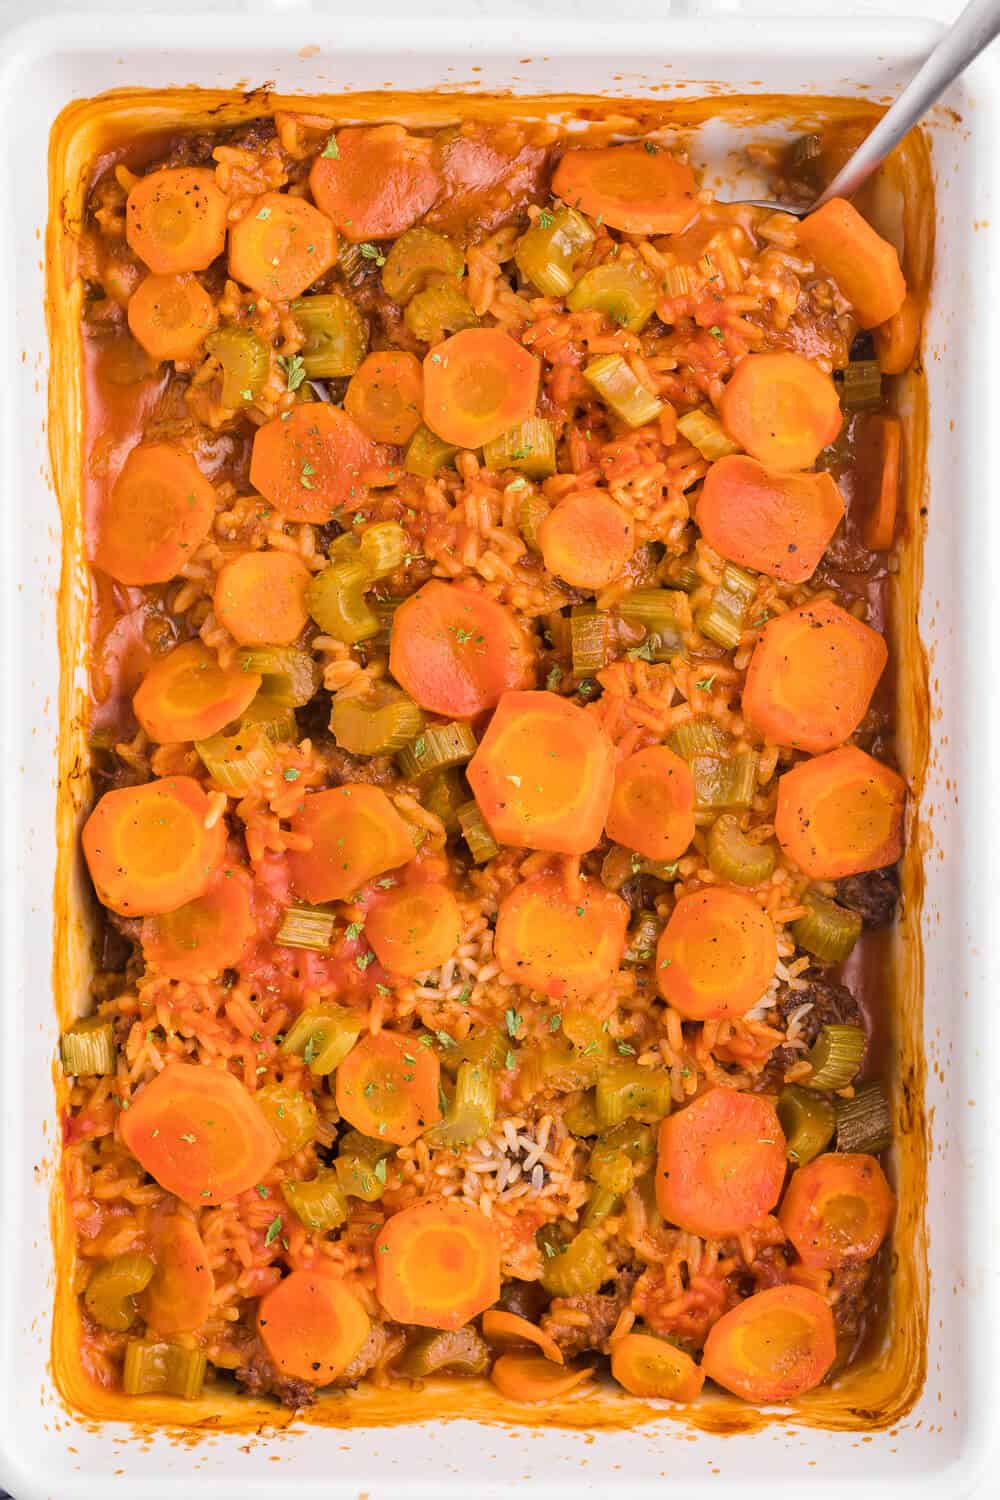 Shipwreck Casserole - The kind of meal grandma used to make! This layered casserole is stick to your bones delicious.